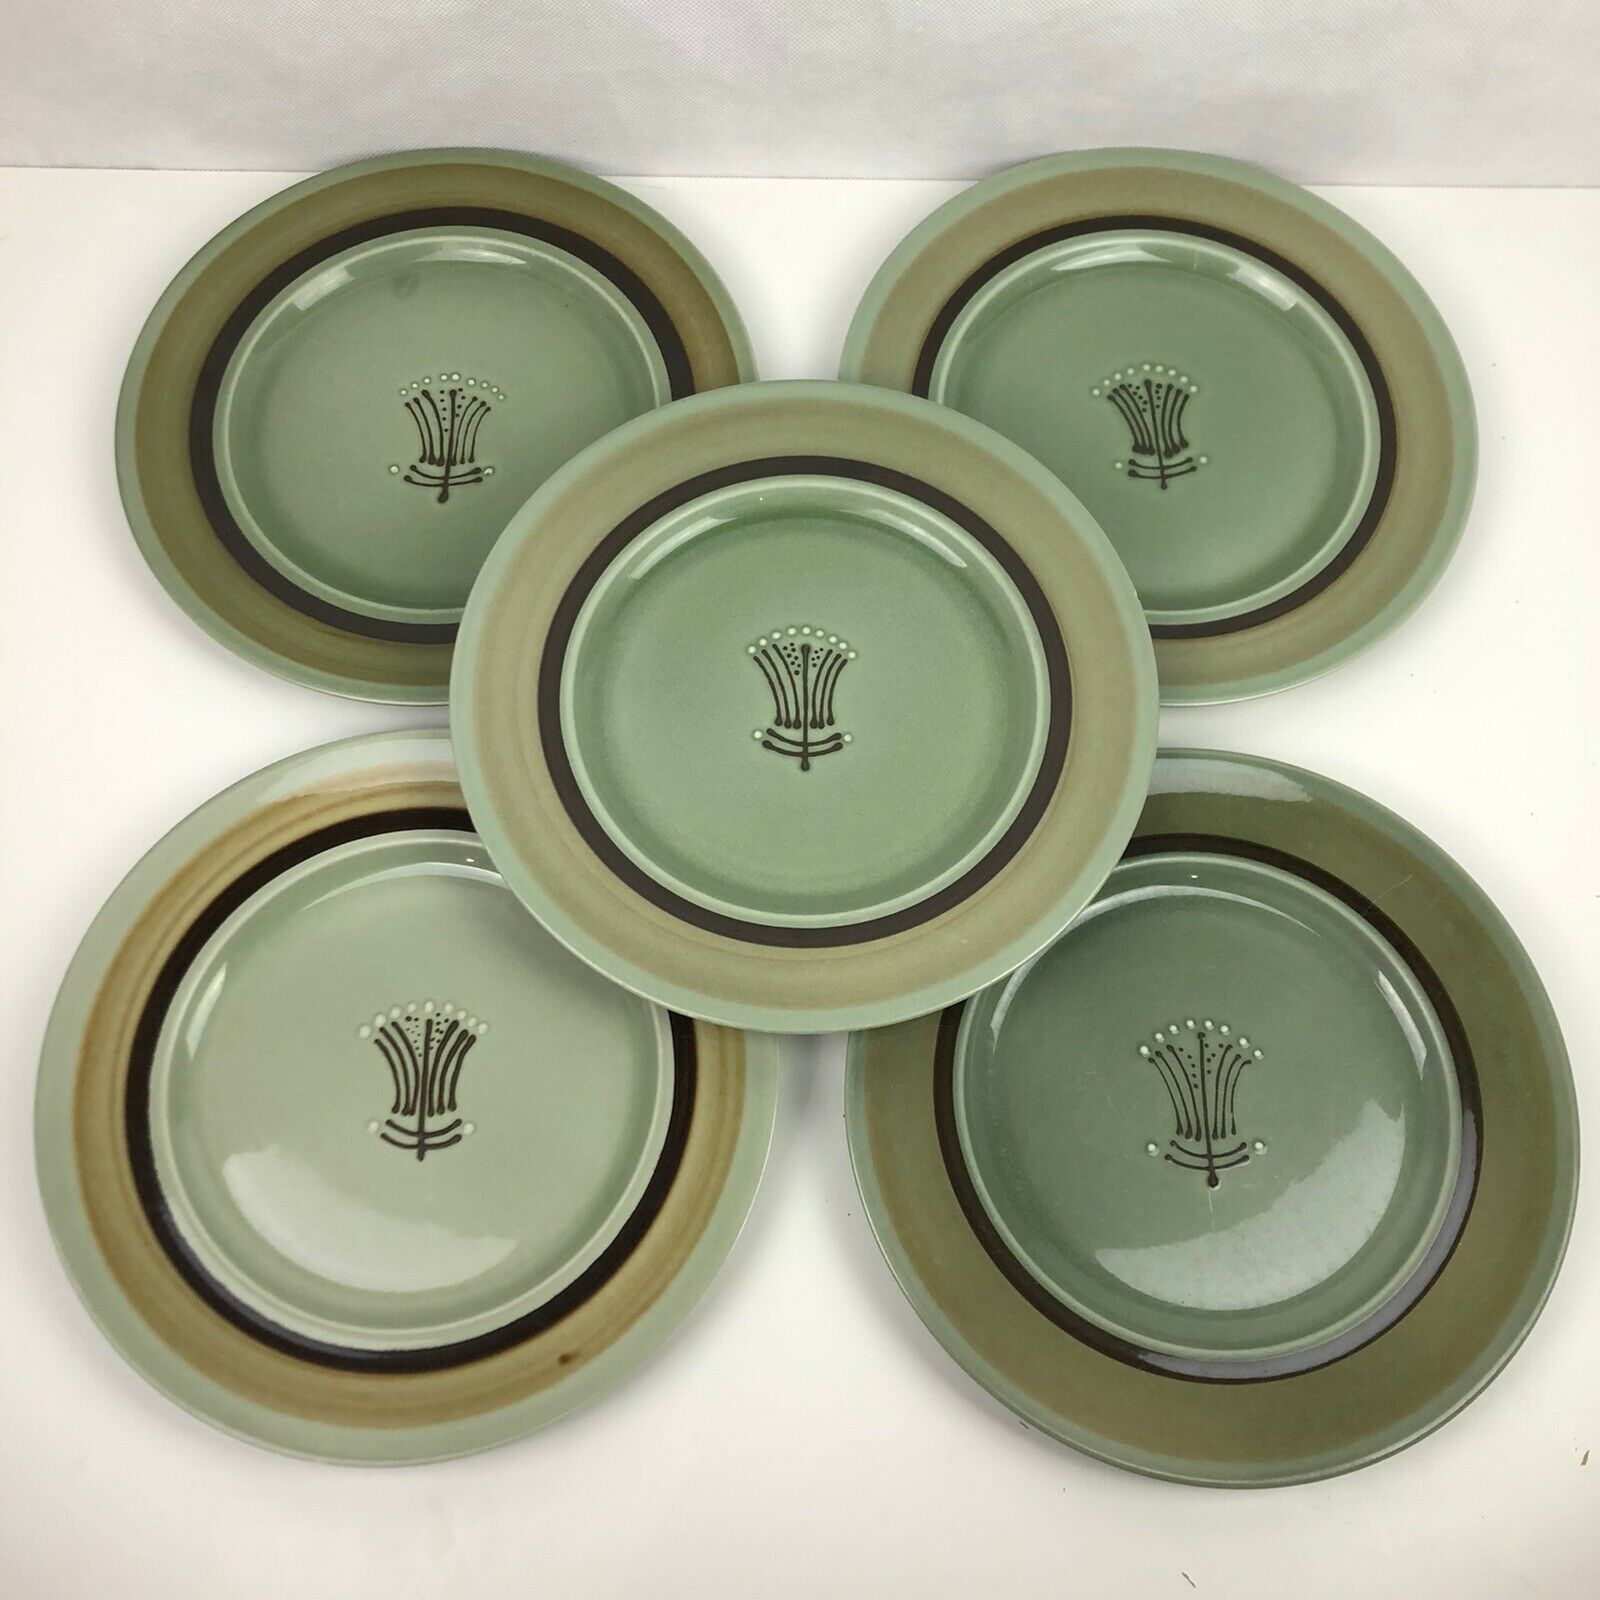 Lot of 5 Franciscan Discovery Emerald Isle 10.25" Dinner Plates Green Brown VTG - $34.64